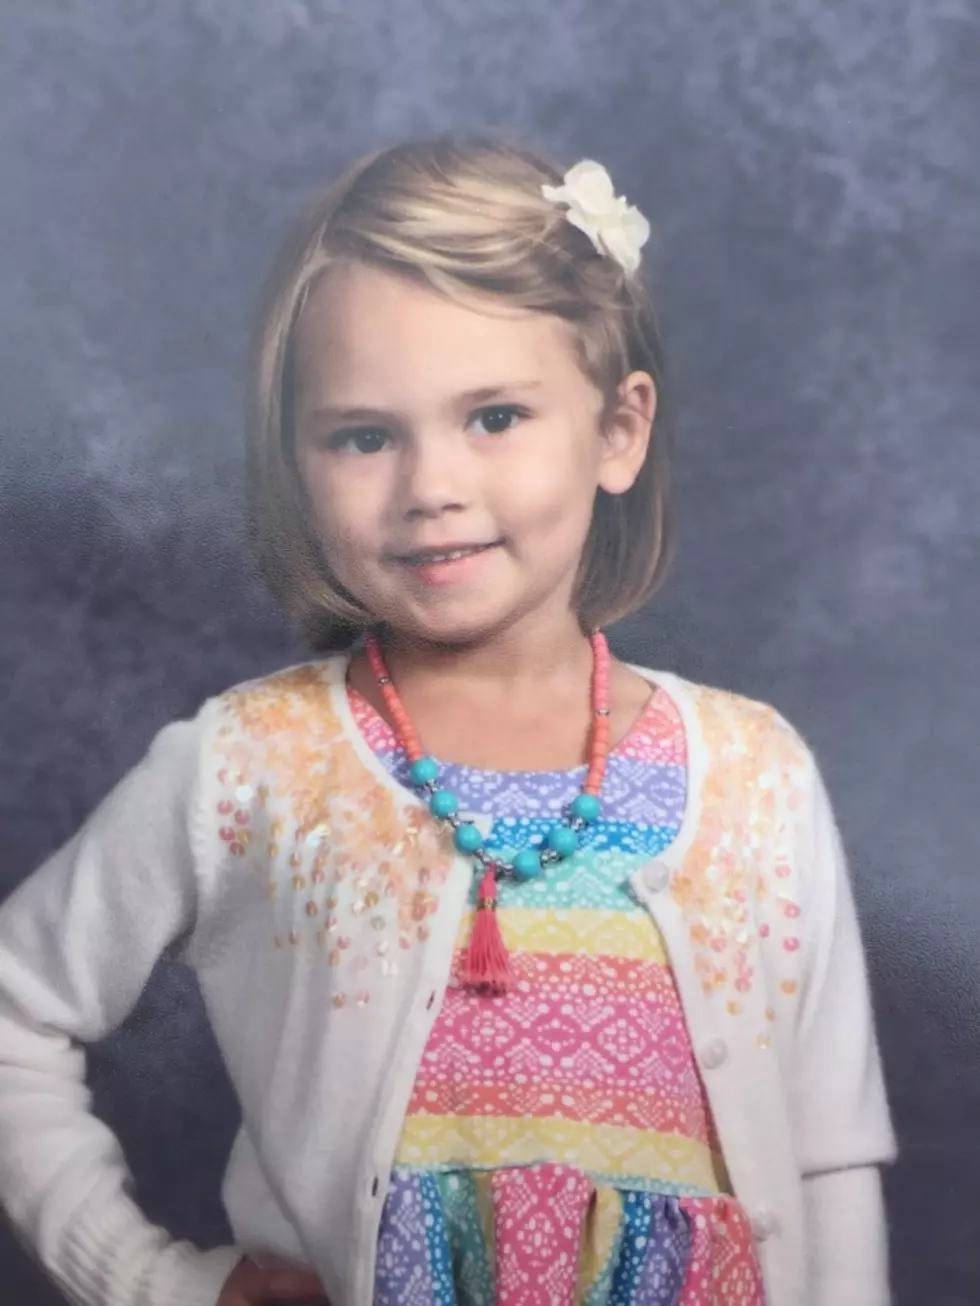 Funeral Services Today For Alayna Ertle in Watkins